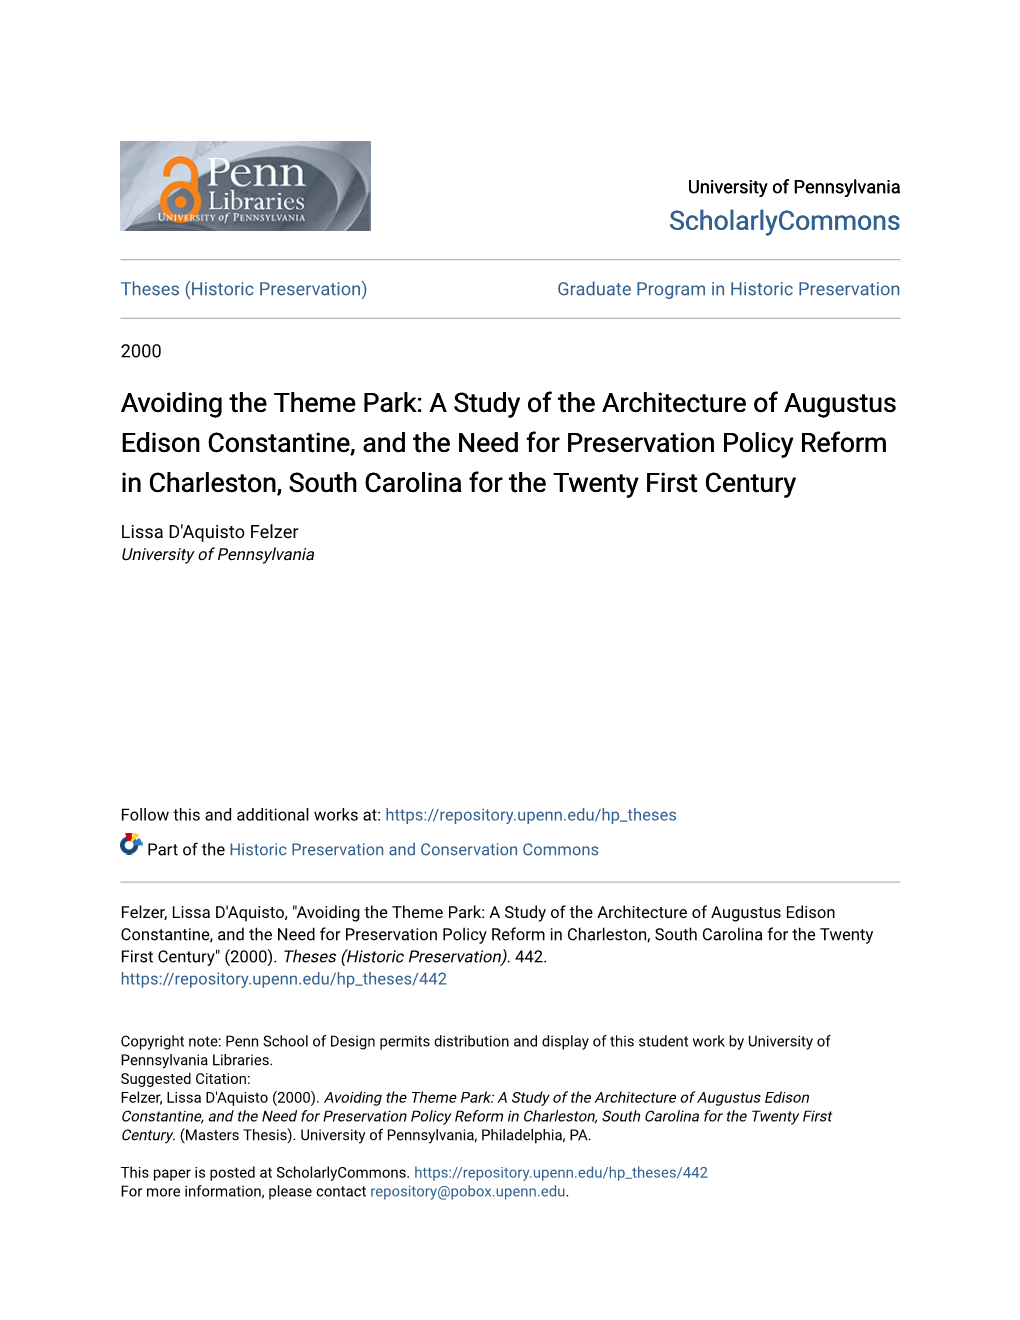 A Study of the Architecture of Augustus Edison Constantine, and the Need for Preservation Policy Reform in Charleston, South Carolina for the Twenty First Century